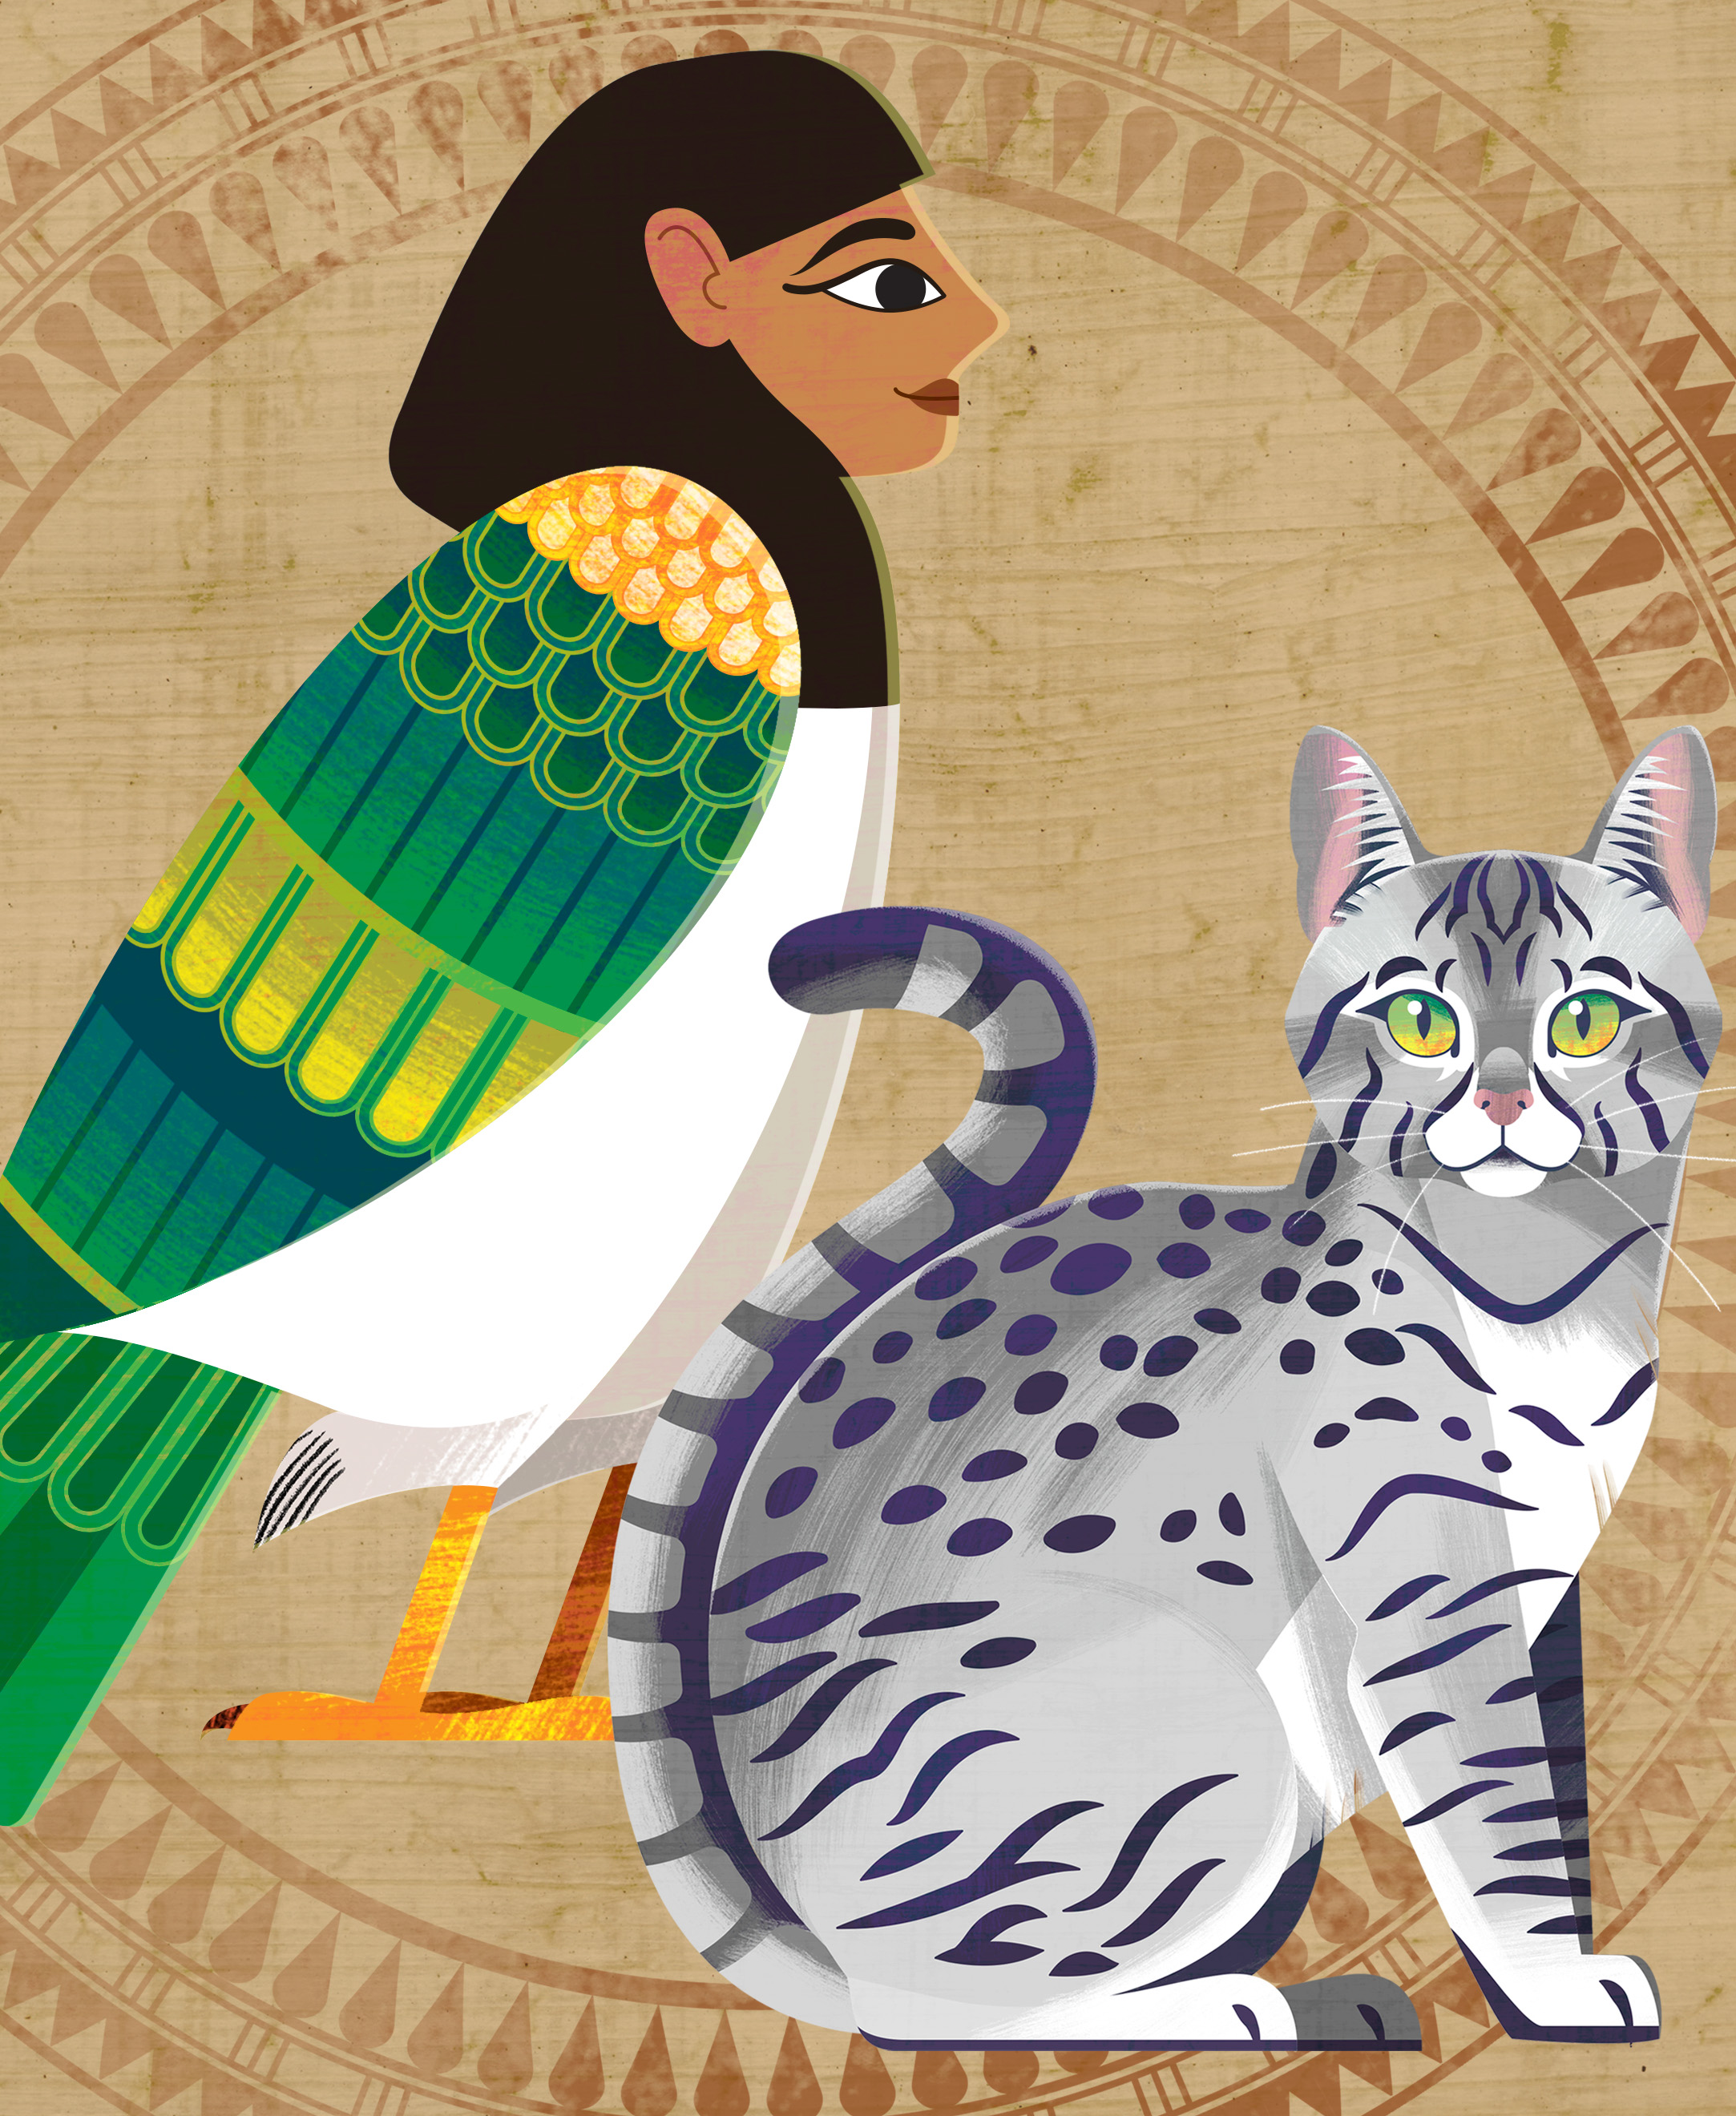 Caricature of Egyptian bird and cat.